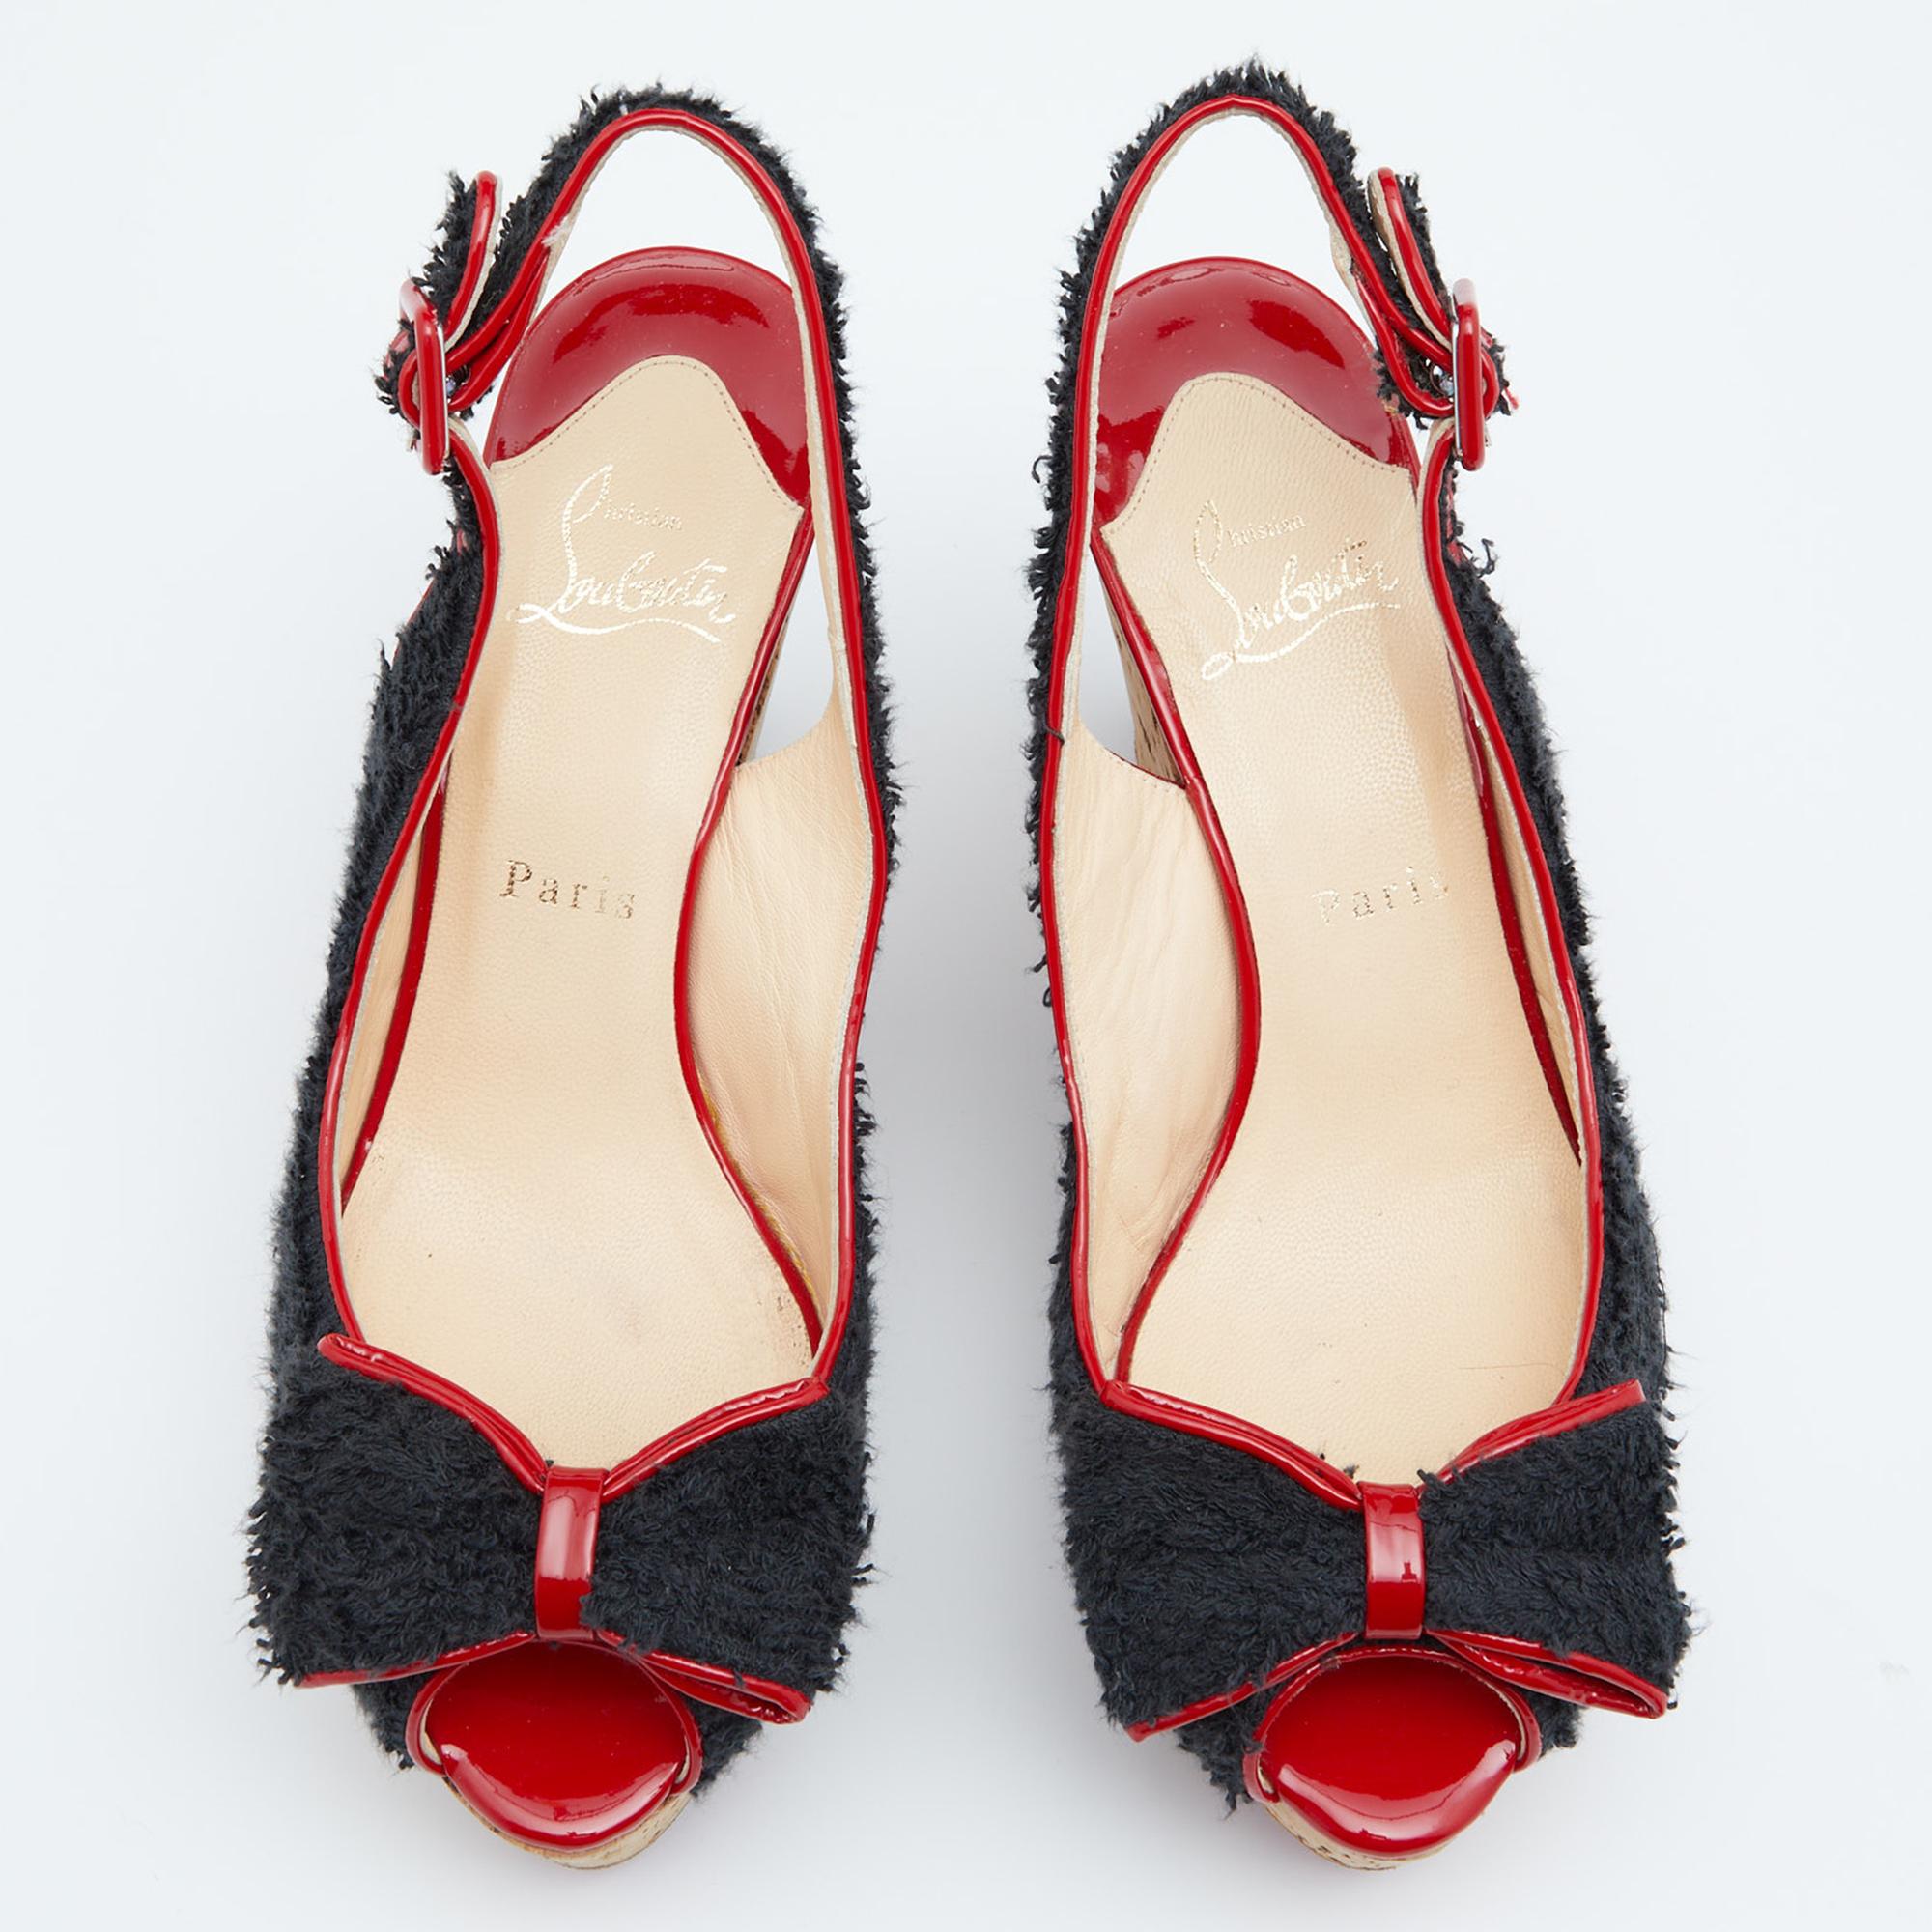 The bow detailing on the peep toes lends these Christian Louboutin sandals an elevated appeal. Constructed from fabric with patent leather trims, the pair flaunts ankle buckle closure, silver-tone hardware, and a leather insole. The